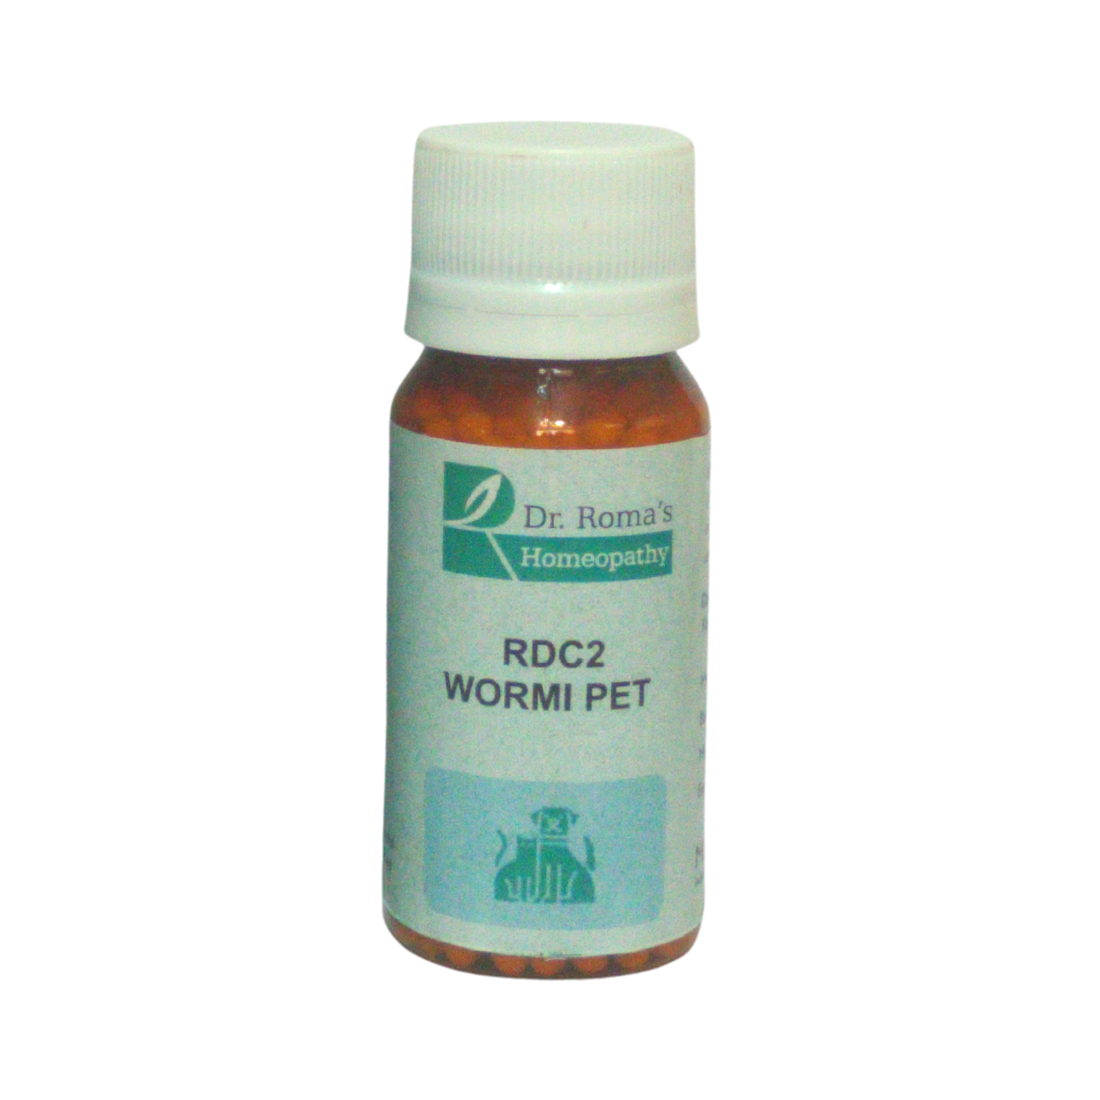 WORMI PET for worms - RDC 2